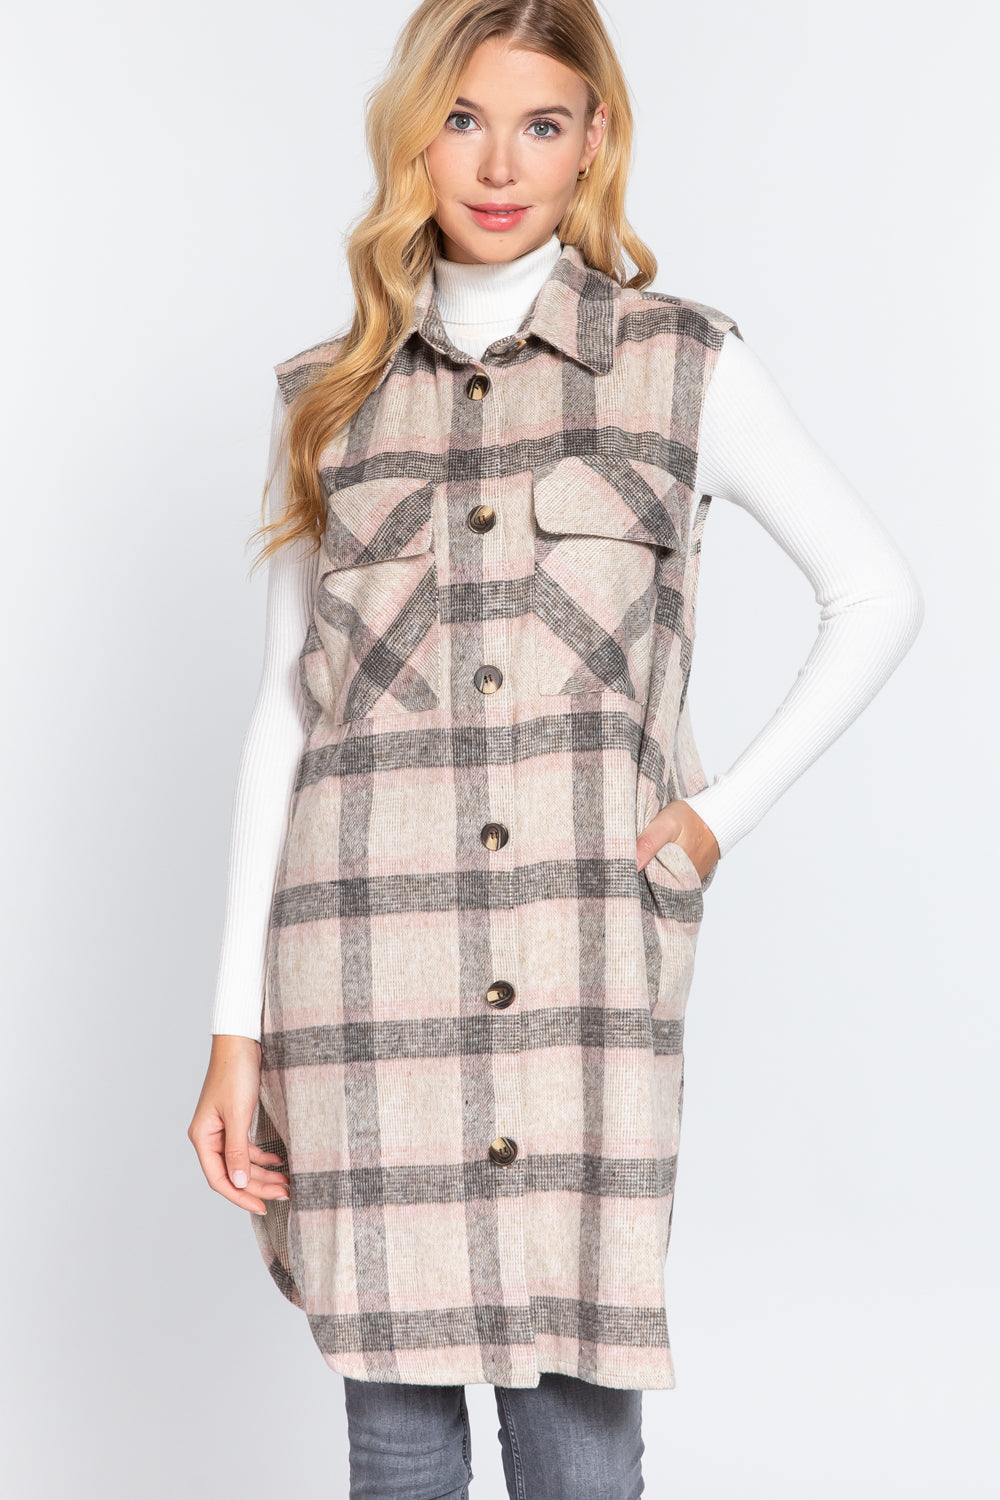 Grey Pink - Notched Collar Brushed Plaid Vest - 2 styles - womens vest at TFC&H Co.